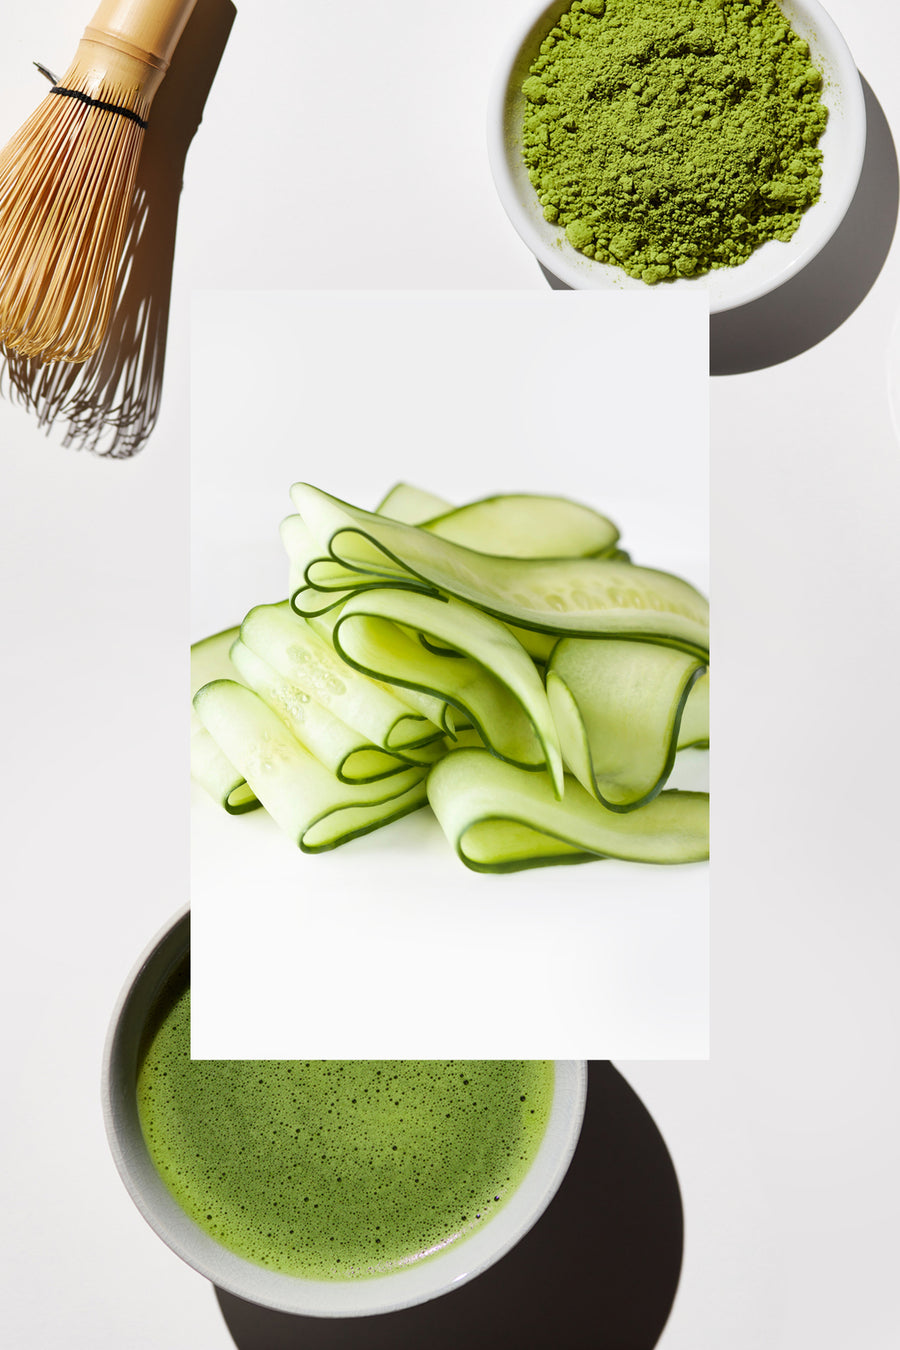 image of green tea and matcha whisk with cucumber in front